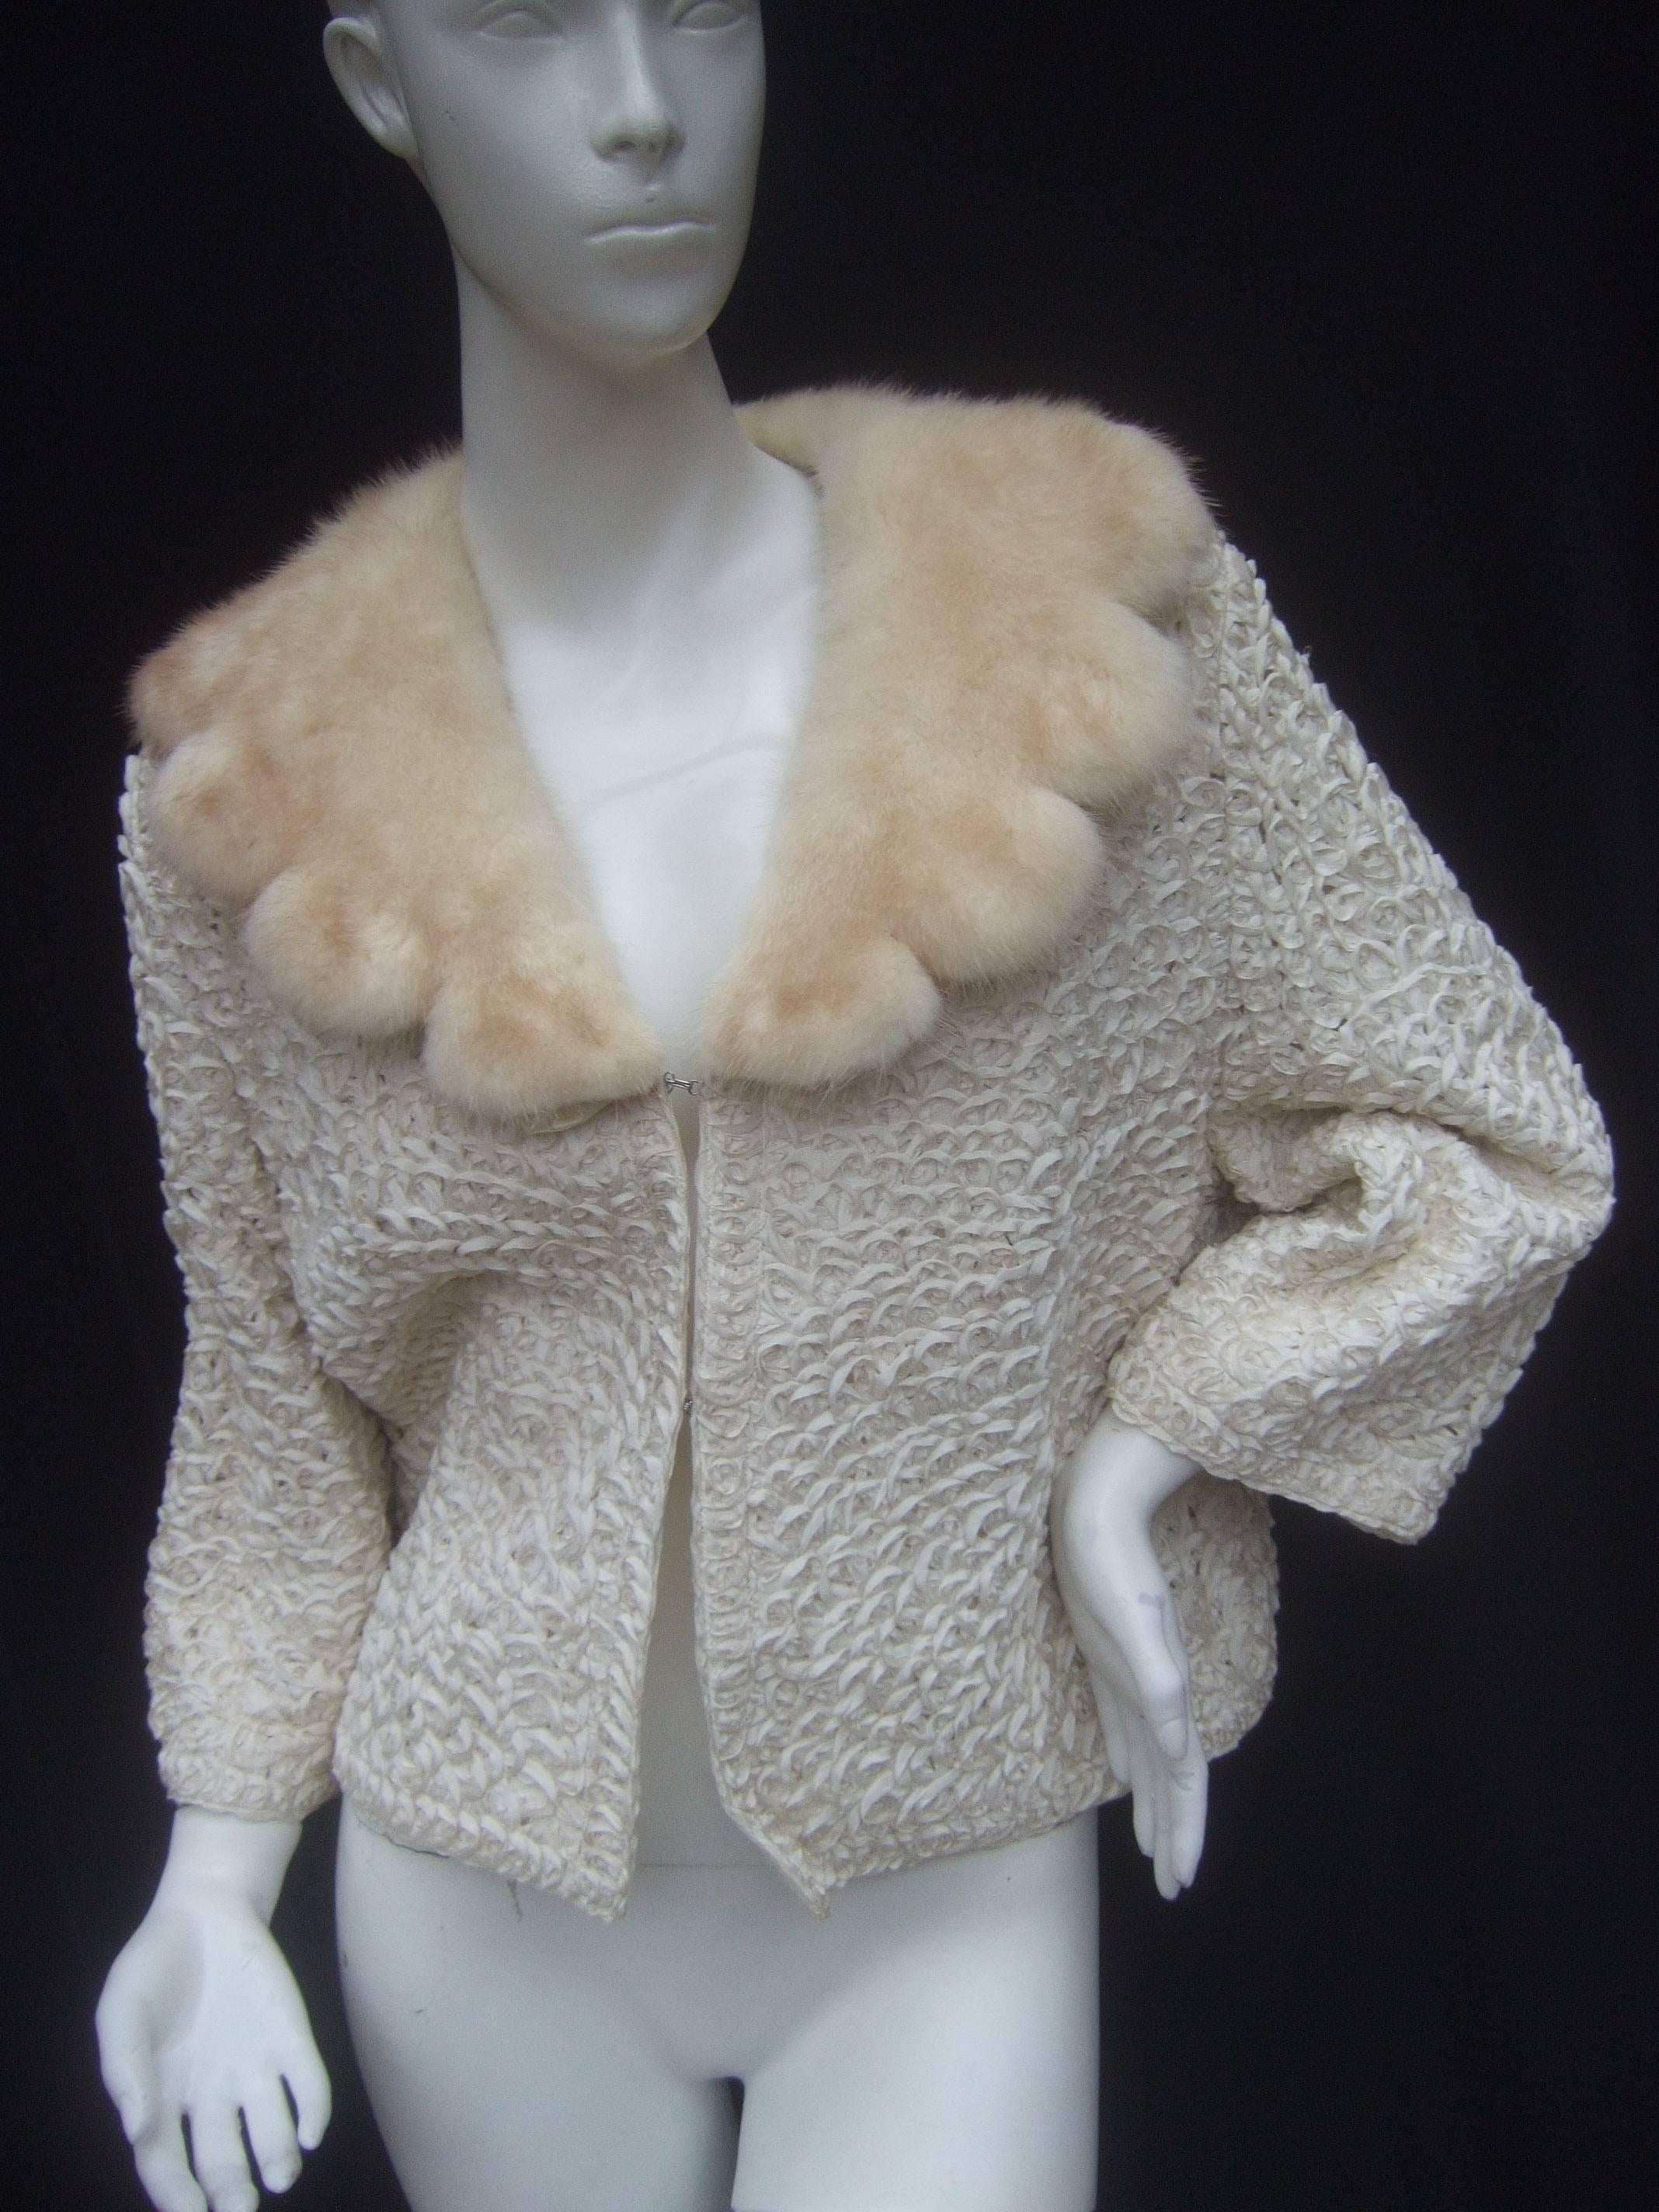 Opulent mink collar ivory ribbon jacket c 1960s
The stylish retro boxy ribbon knit jacket is paired 
with a sumptuous blonde scalloped milk collar 

The jacket is designed with intricate woven 
ivory color ribbons throughout. The interior
is